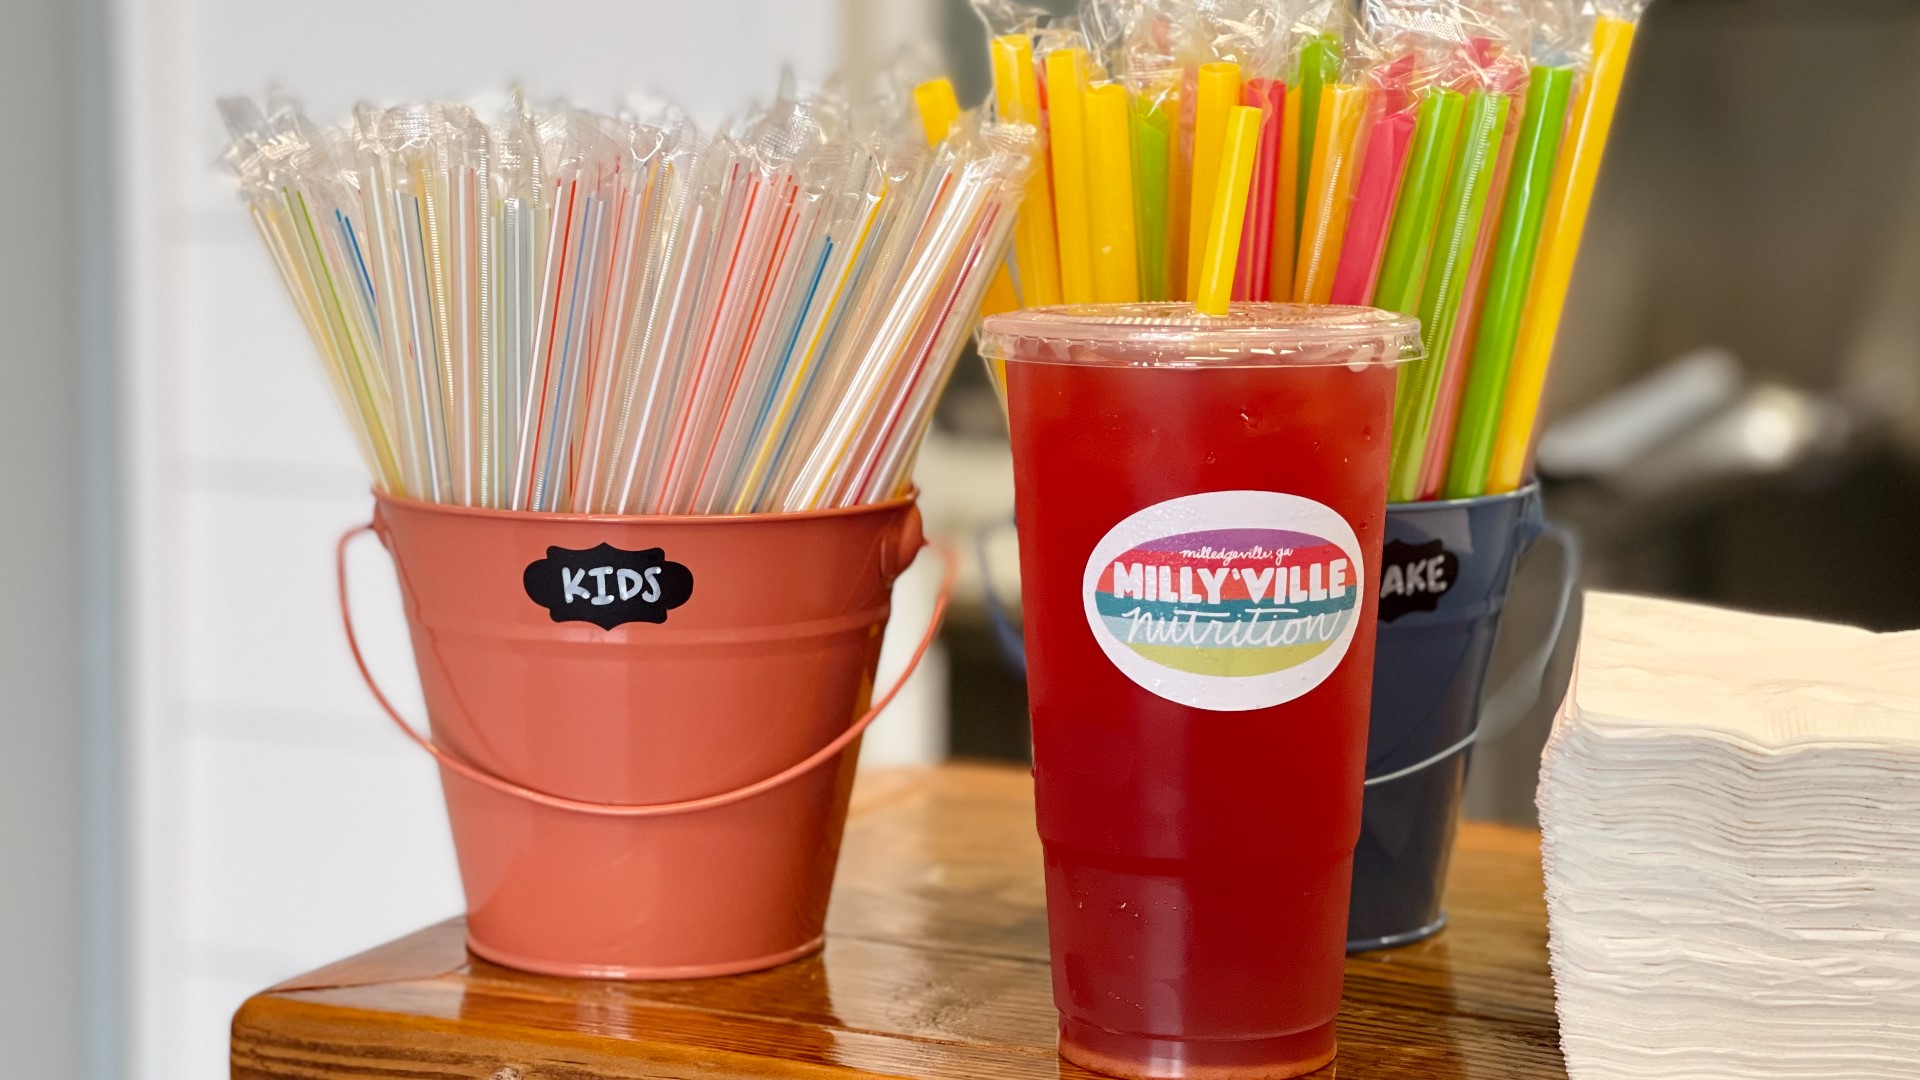 Milly'ville Nutrition offers a wide variety of drinks and shakes, and you don't have to cheat on your diet to try one